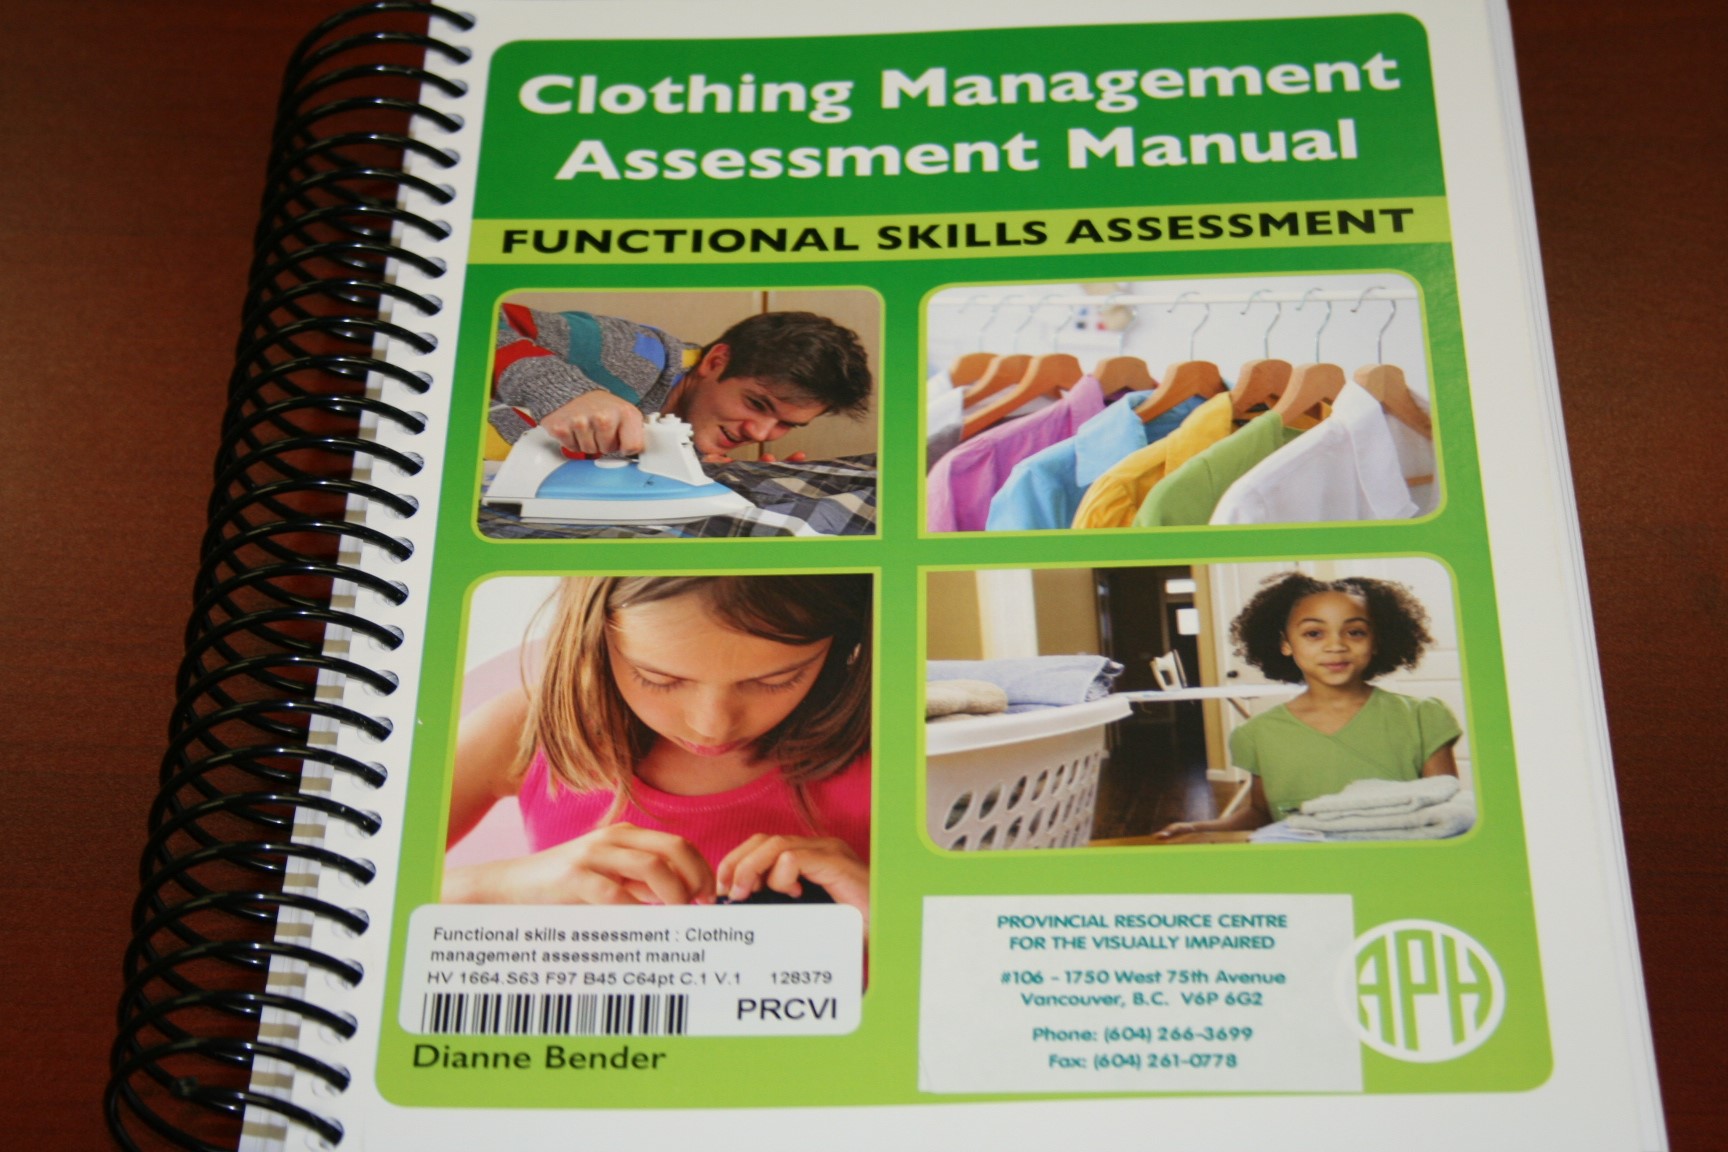 Cover of Clothing Management Assessment Manual.